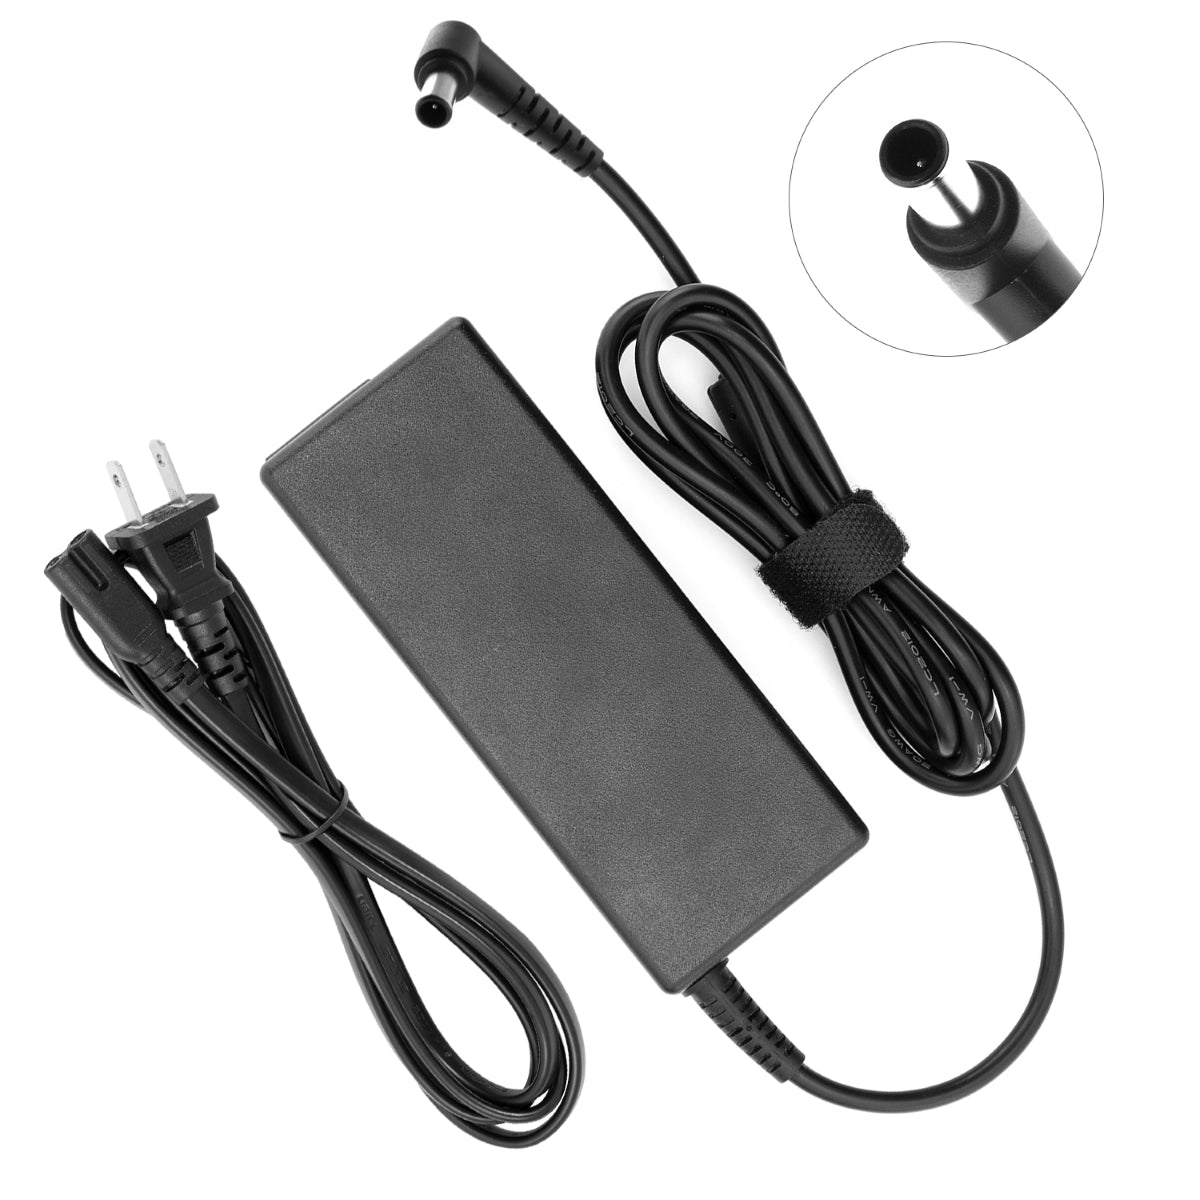 Compatible Charger for Sony Vaio PCG-7133L